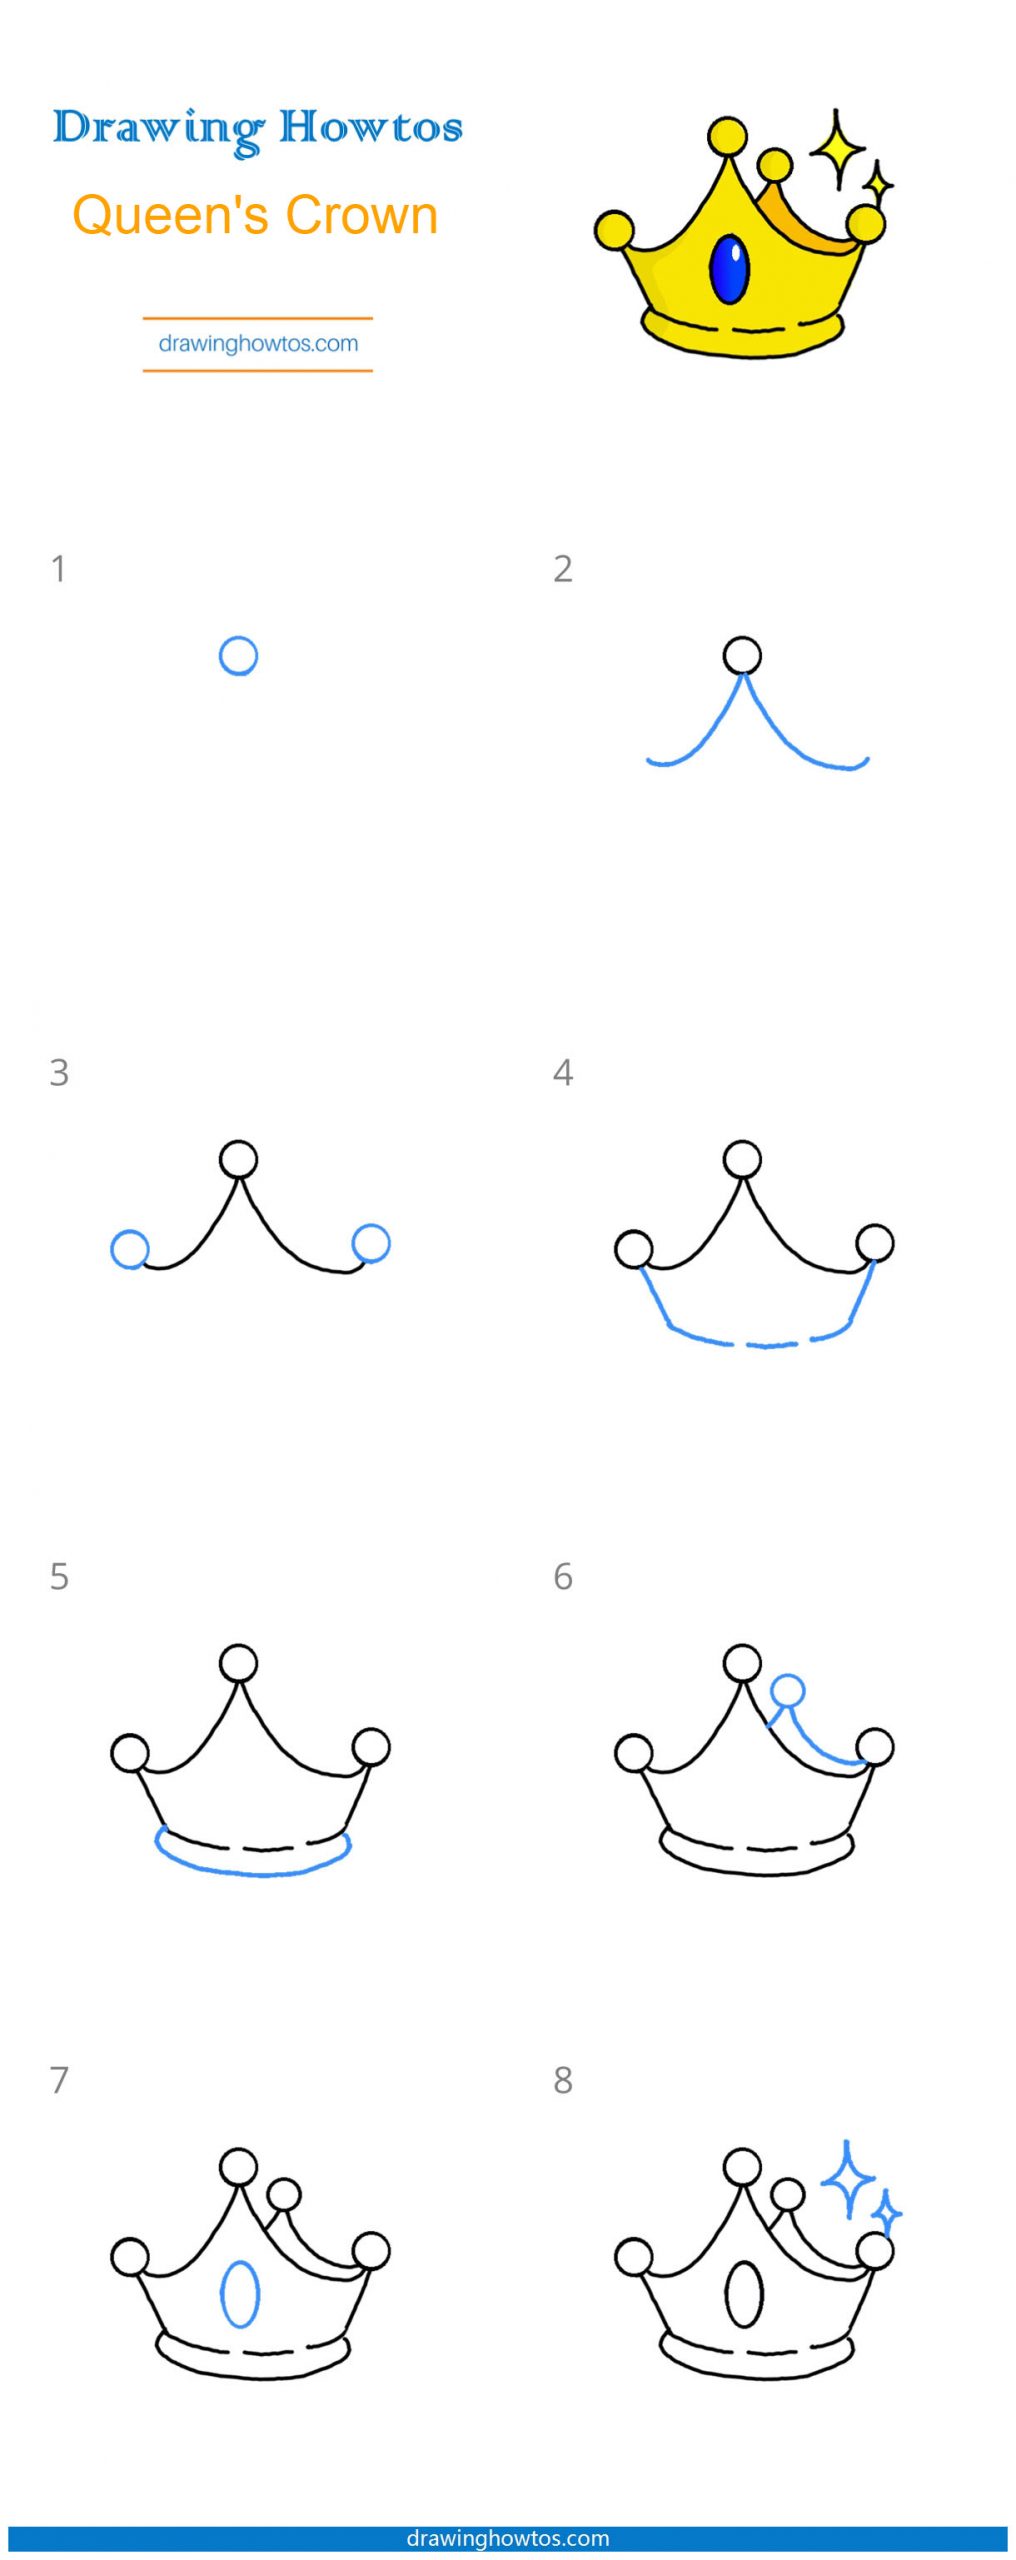 How to Draw a Queen's Crown Step by Step